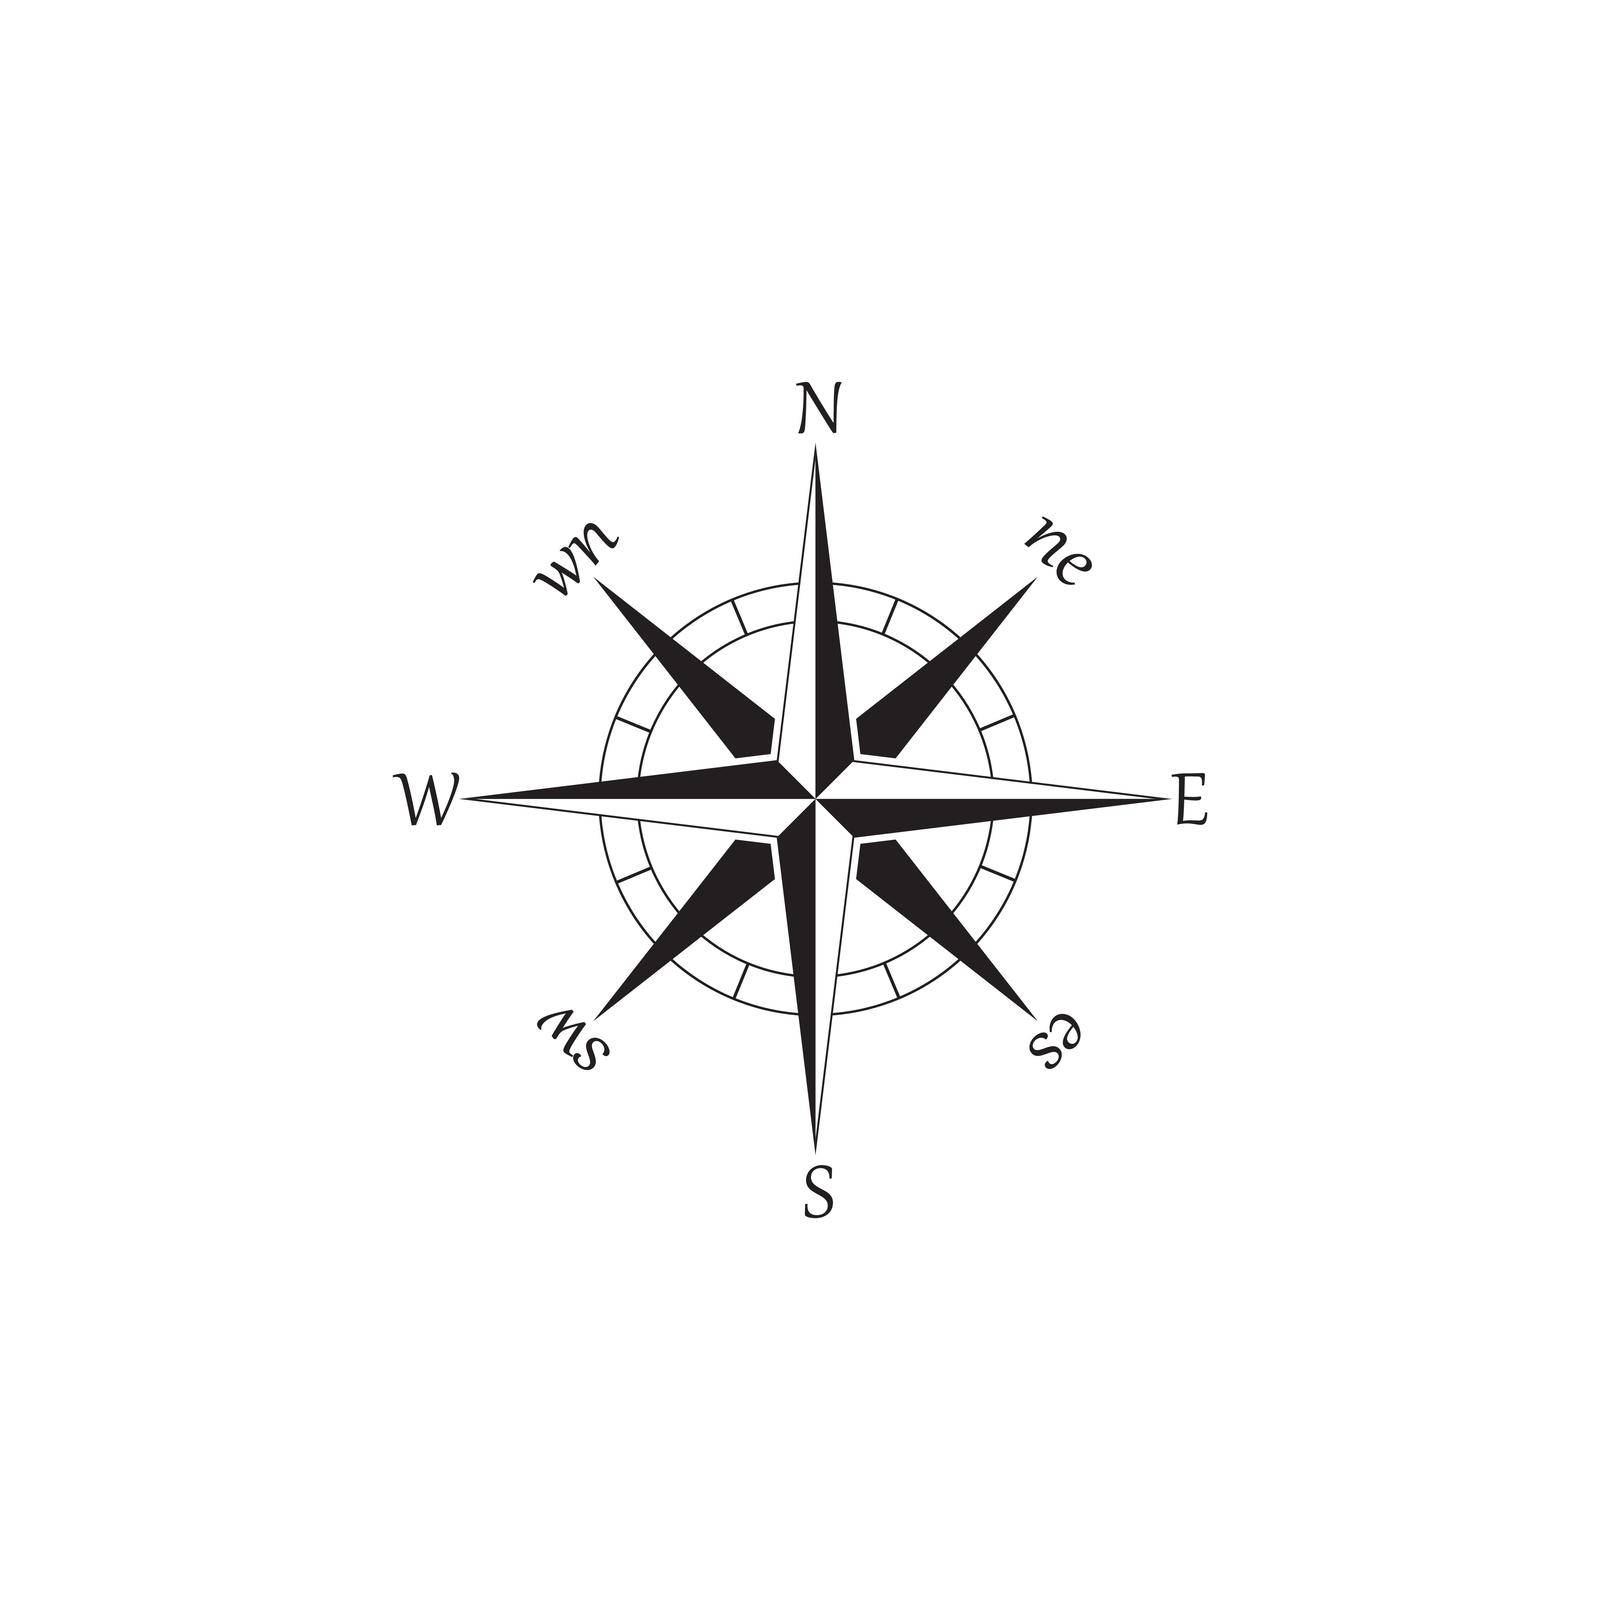 Vector - Compass signs and symbols by ichadsgn